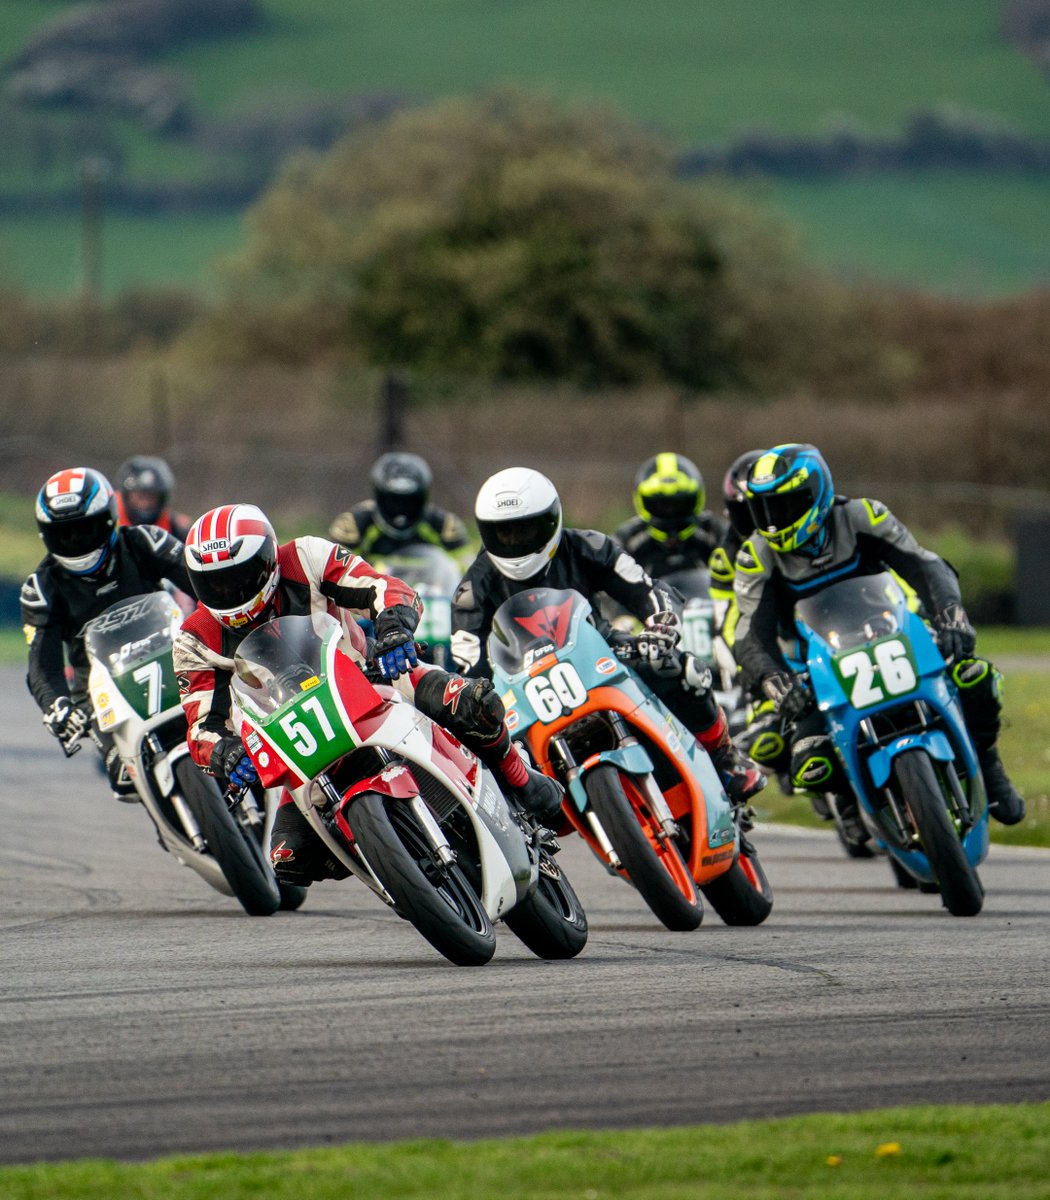 The bike action continues at Pembrey on the 13/14th April as the British Motorcycle Racing Club races into the Home of Welsh Motorsport🏴󠁧󠁢󠁷󠁬󠁳󠁿 🎟 Advance e-tickets online from £18 🎟 Tickets on the gate from £20 ⬇️ Under 15's go FREE! 🔗 pembreycircuit.co.uk/racing/motorcy… 📸 Clockwork Net